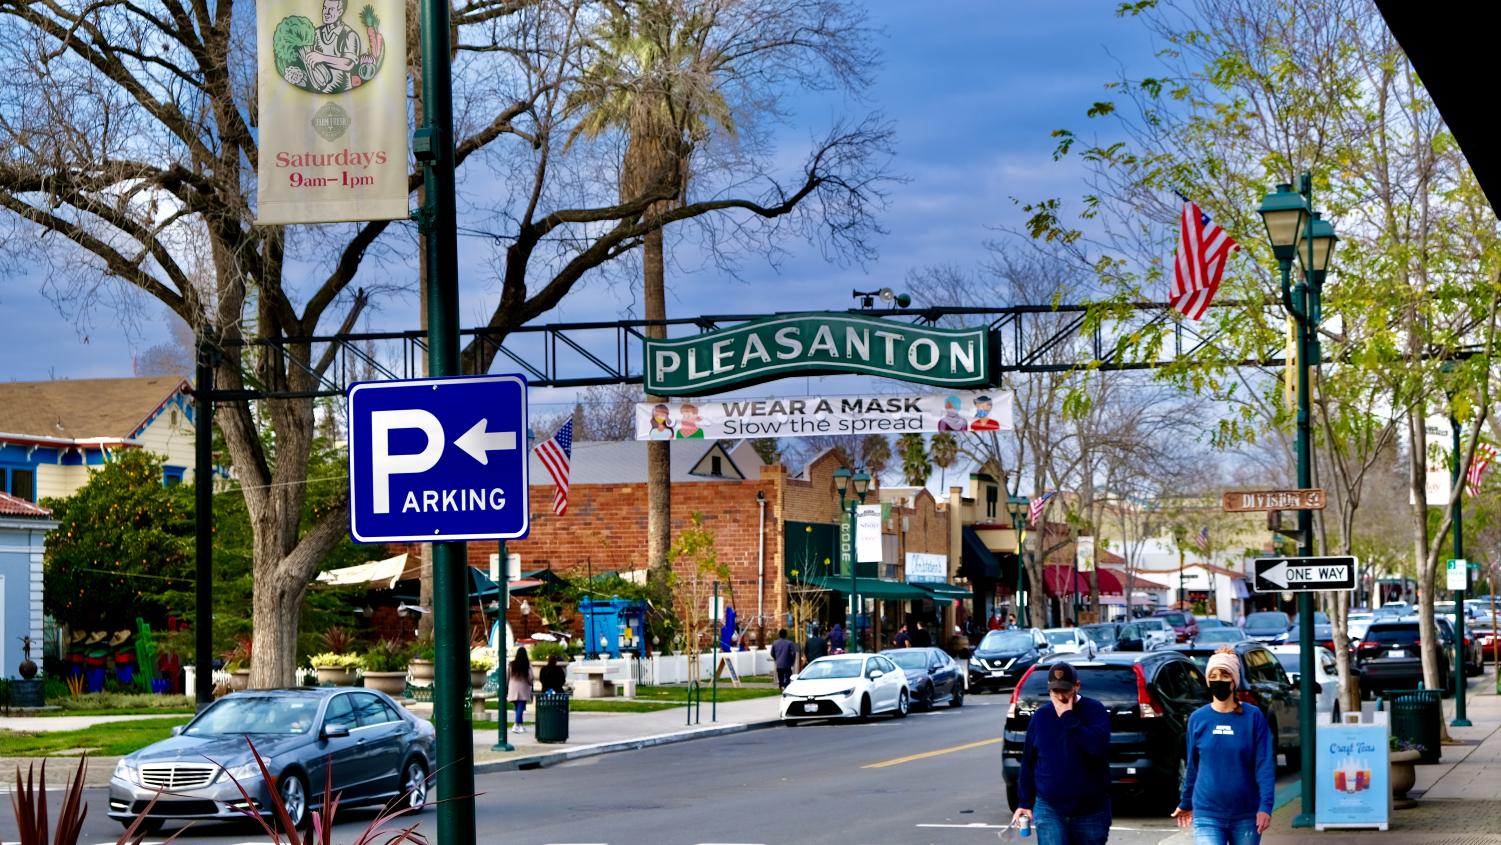 March+2021%3A+Downtown+Pleasanton+slowly+opens+back+up+to+the+public